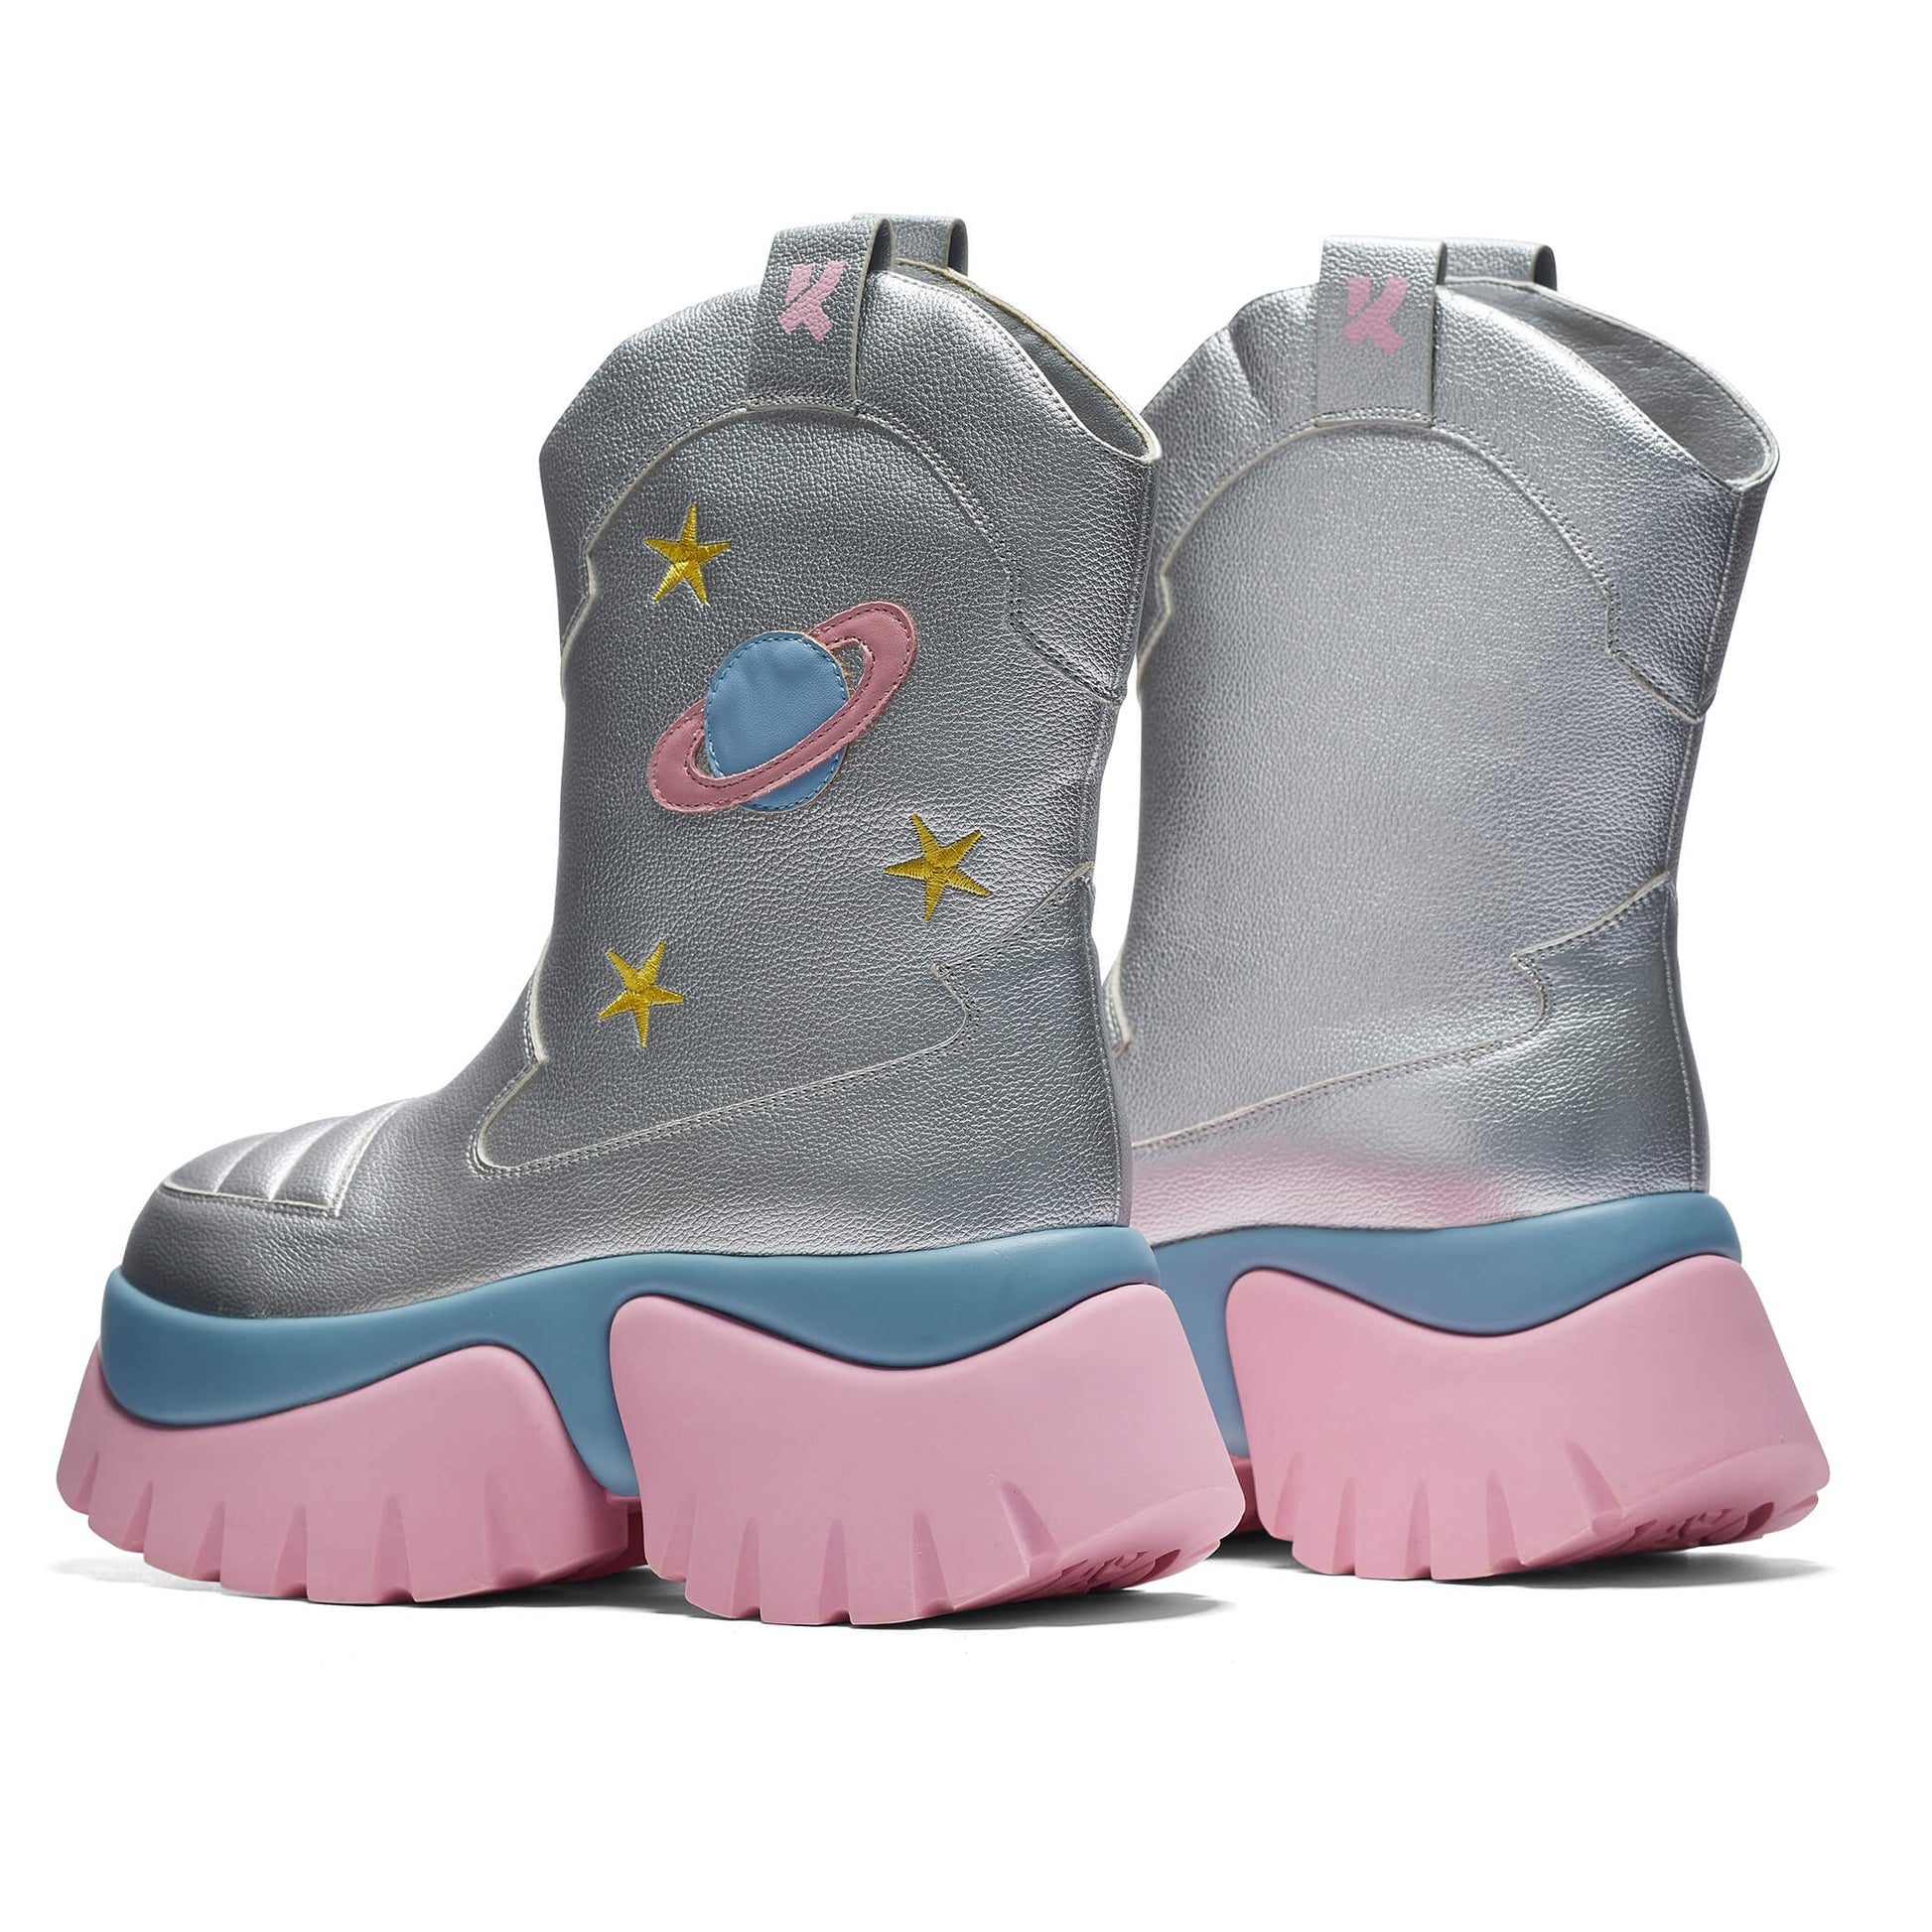 A Fairytale Galaxy Space Boots - Silver - Ankle Boots - KOI Footwear - Silver - Back View